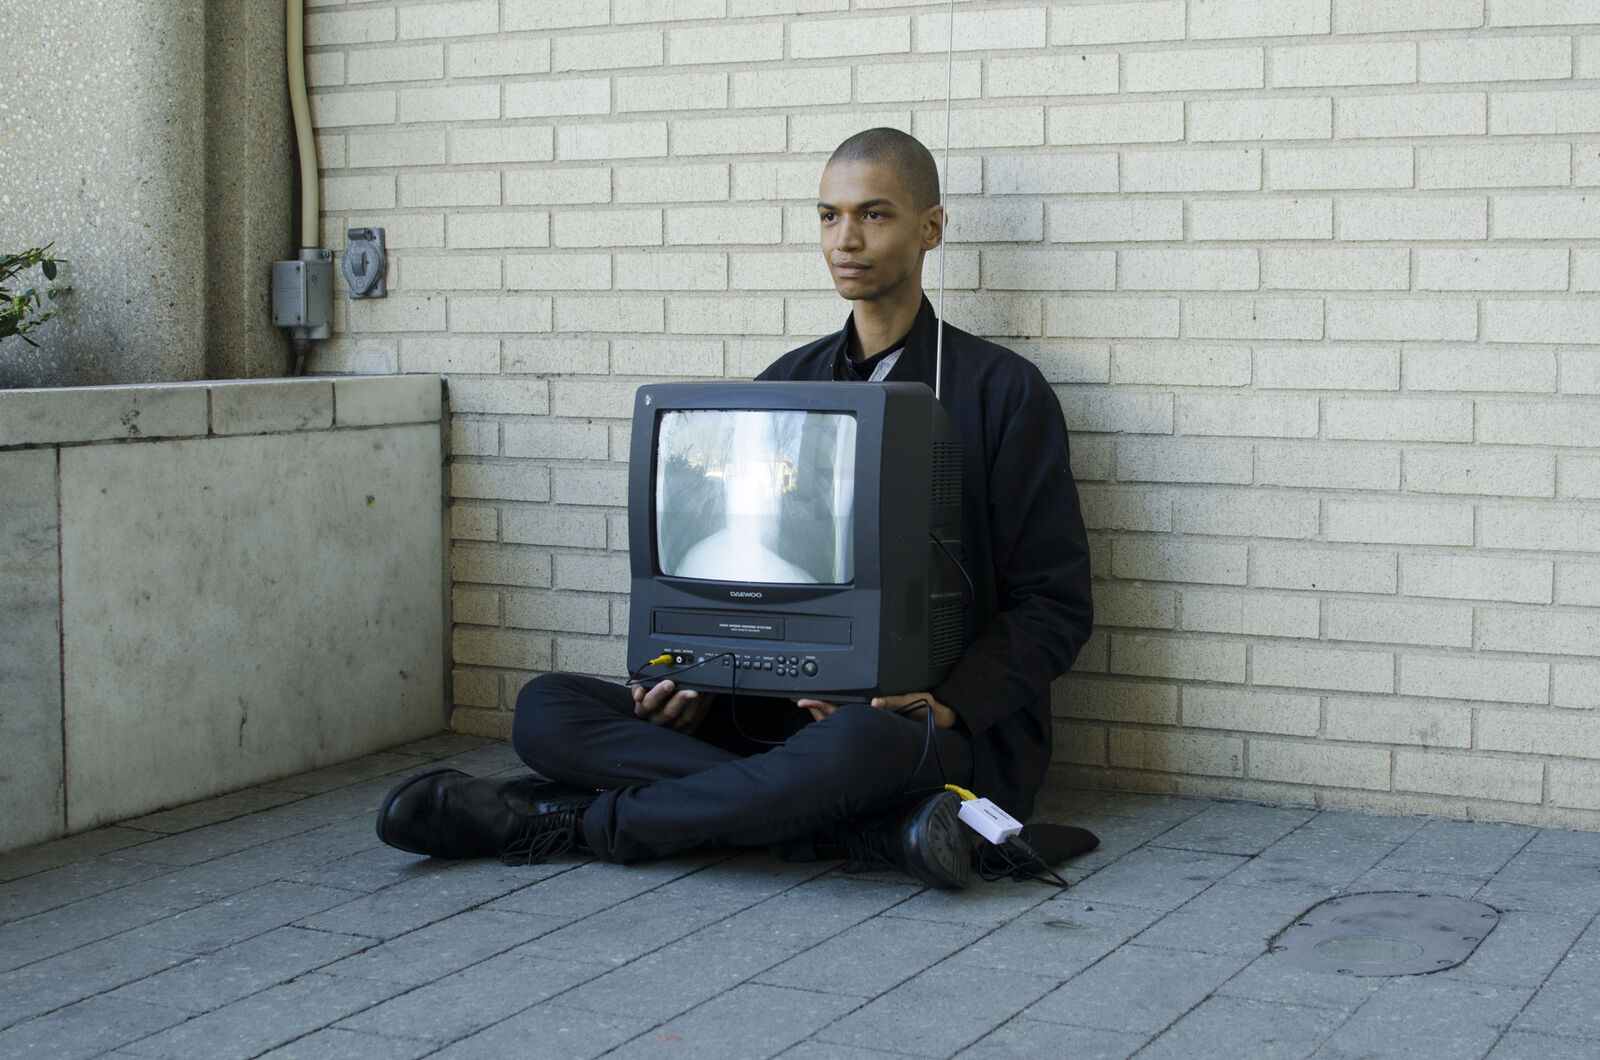 person sitting on floor holding a television